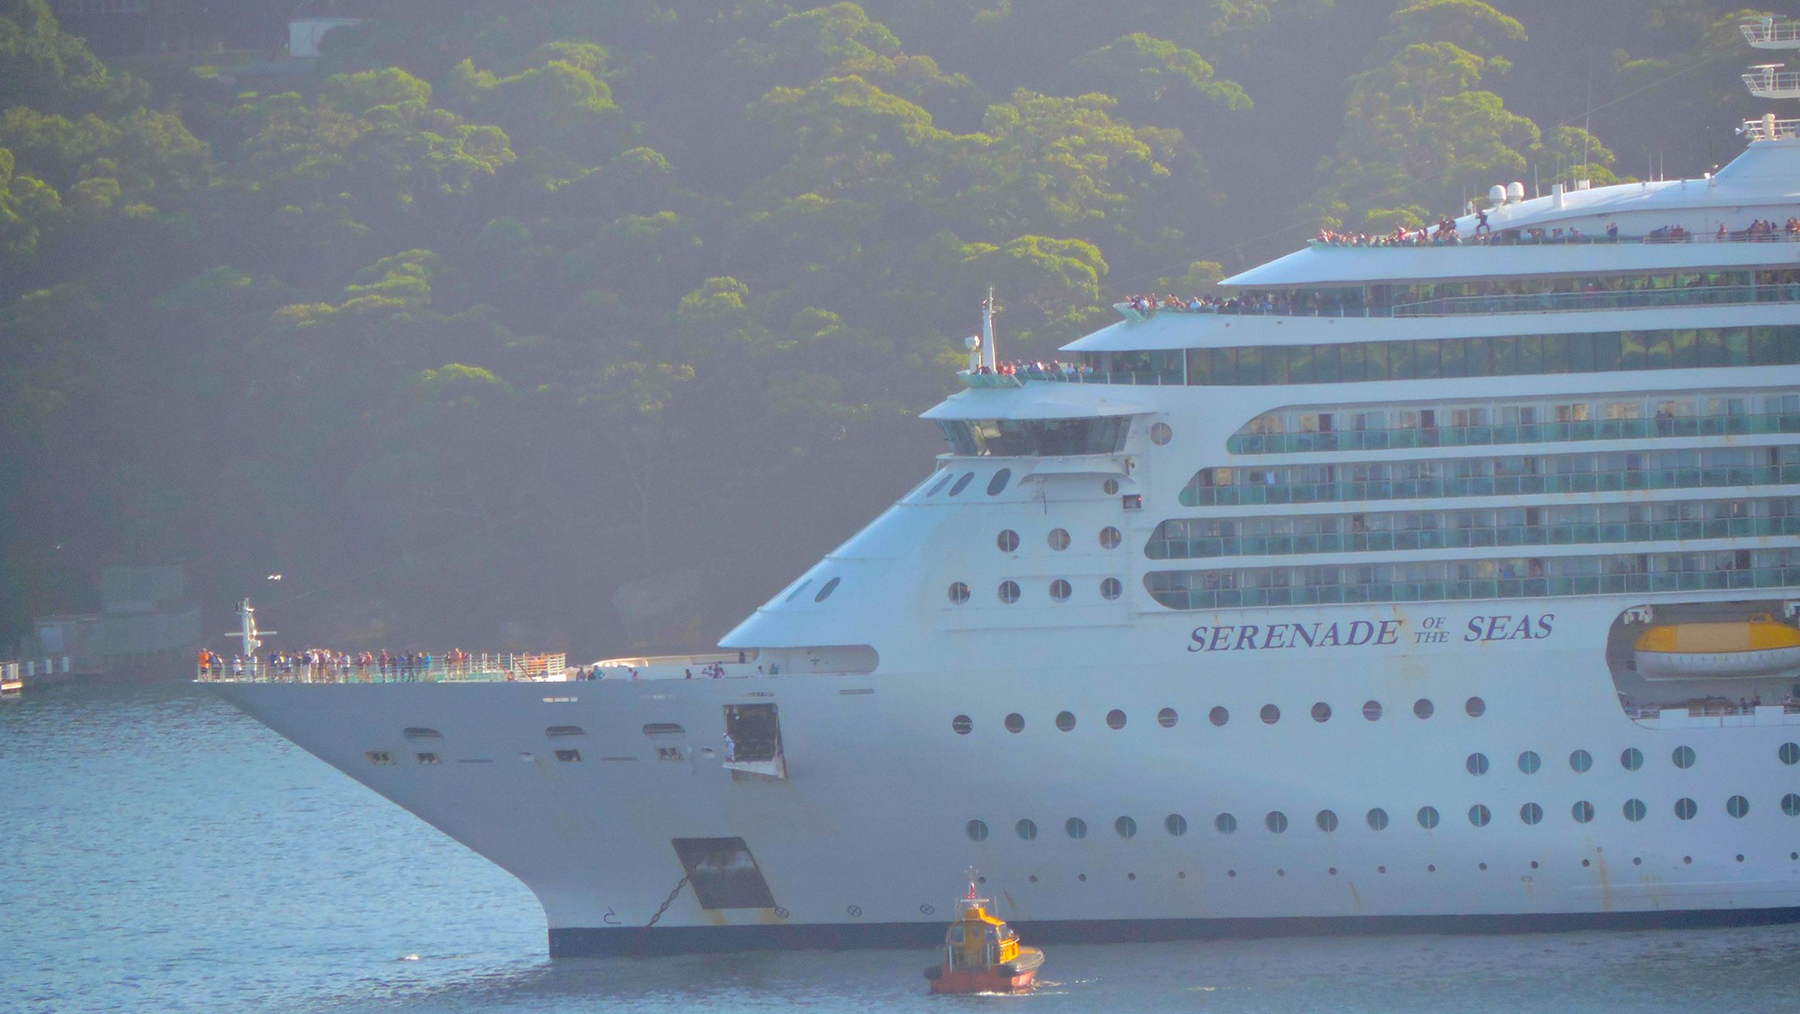 Serenade of the Seas in Sydney Harbour today on her Ultimate World Cruise